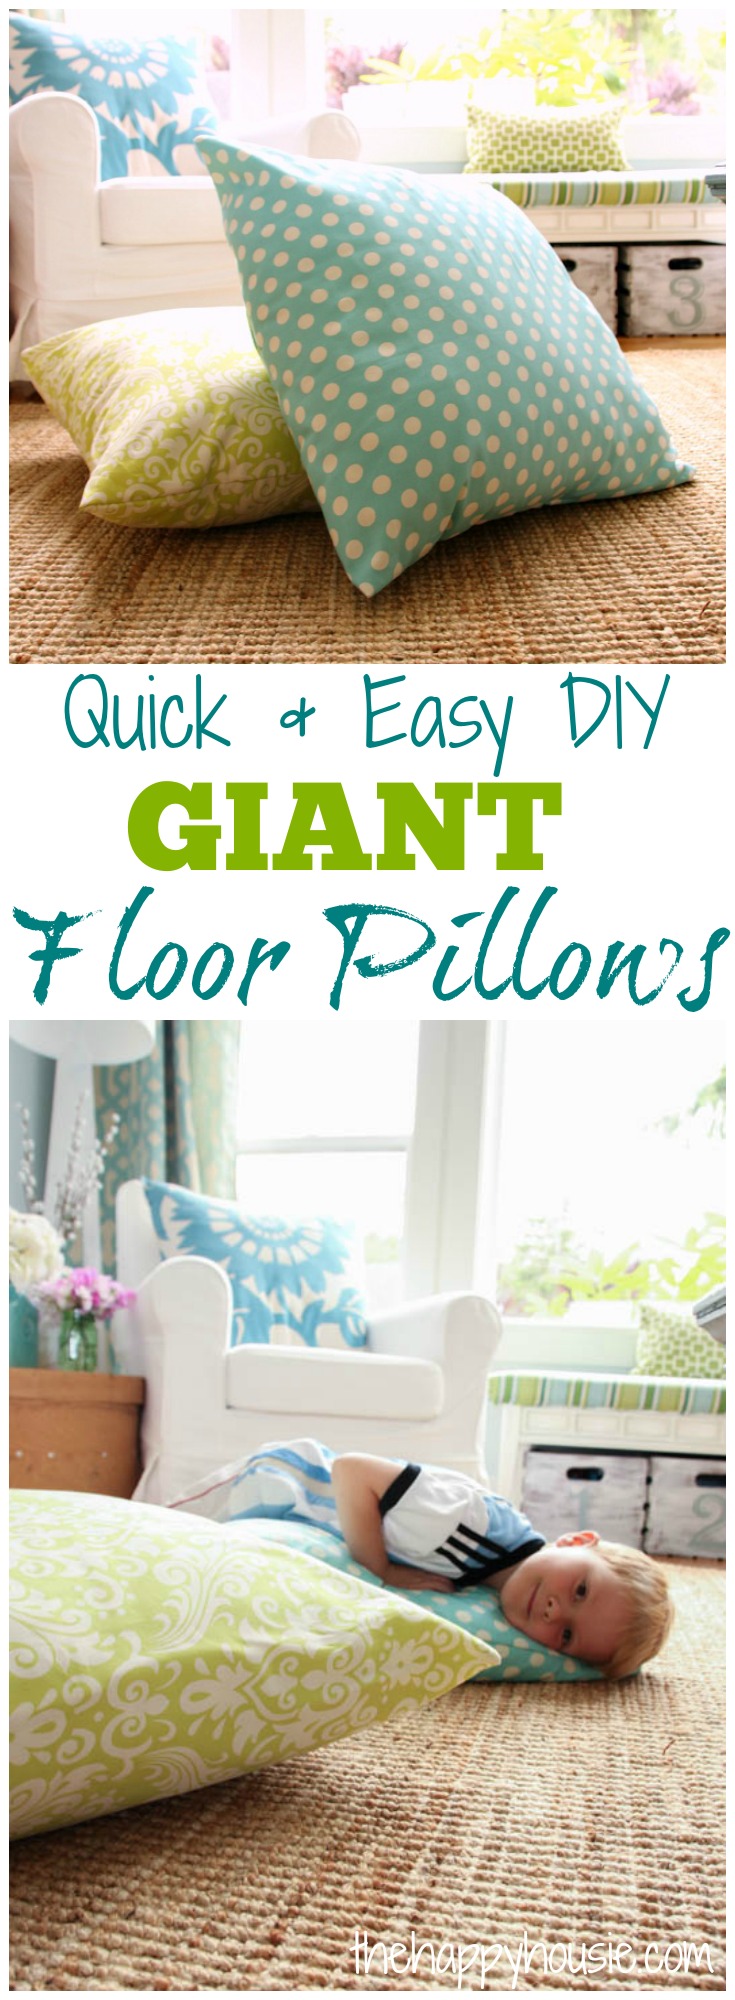 https://www.thehappyhousie.com/wp-content/uploads/2015/06/Awesome-tutorial-on-how-to-make-these-quick-and-easy-DIY-Giant-Floor-Pillows-in-only-minutes-at-thehappyhousie.com_.jpg